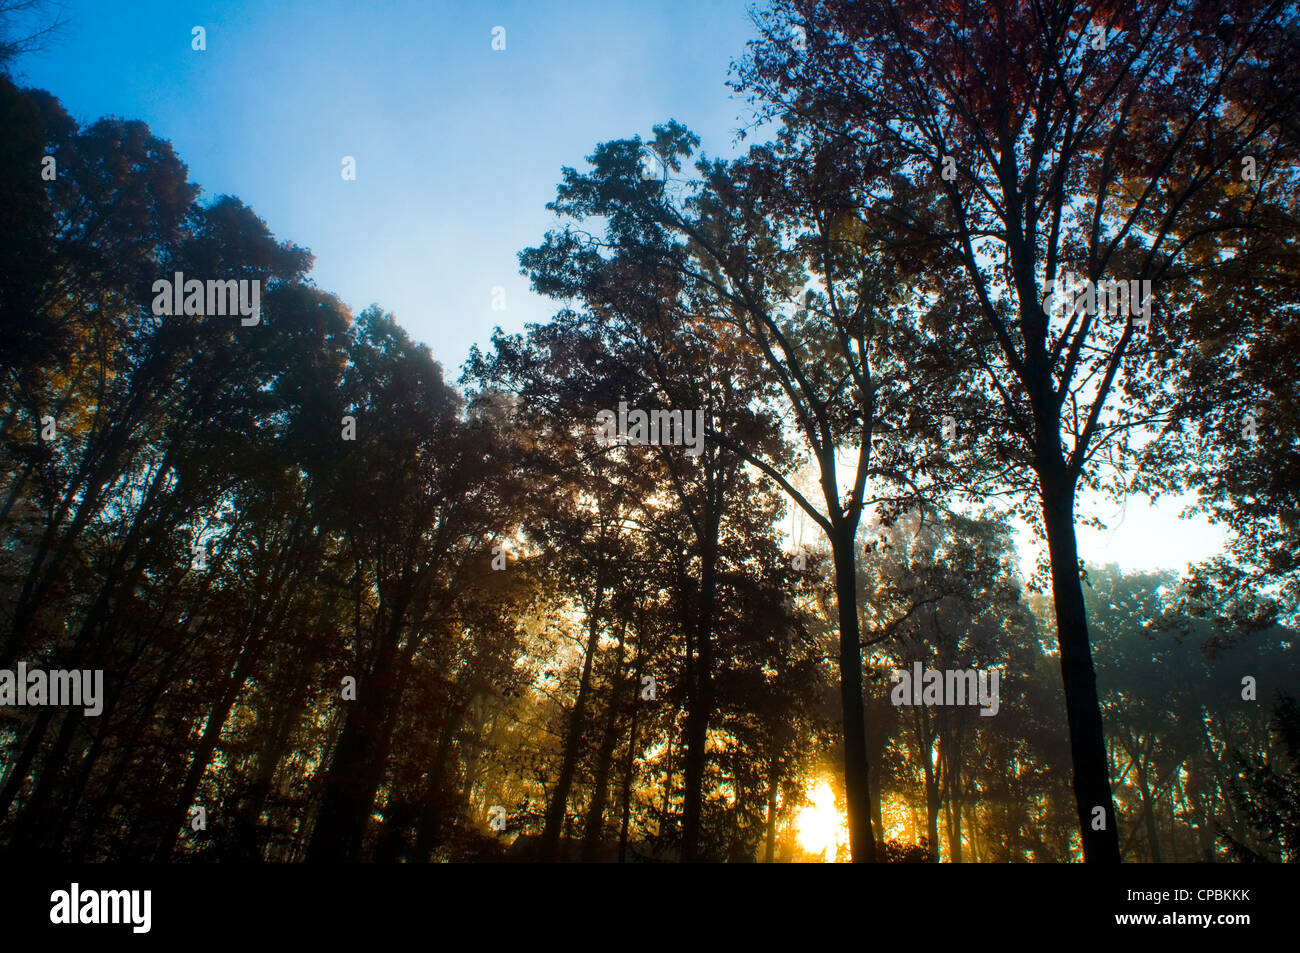 Early morning sun just begins to rise through a forest of trees. Stock Photo